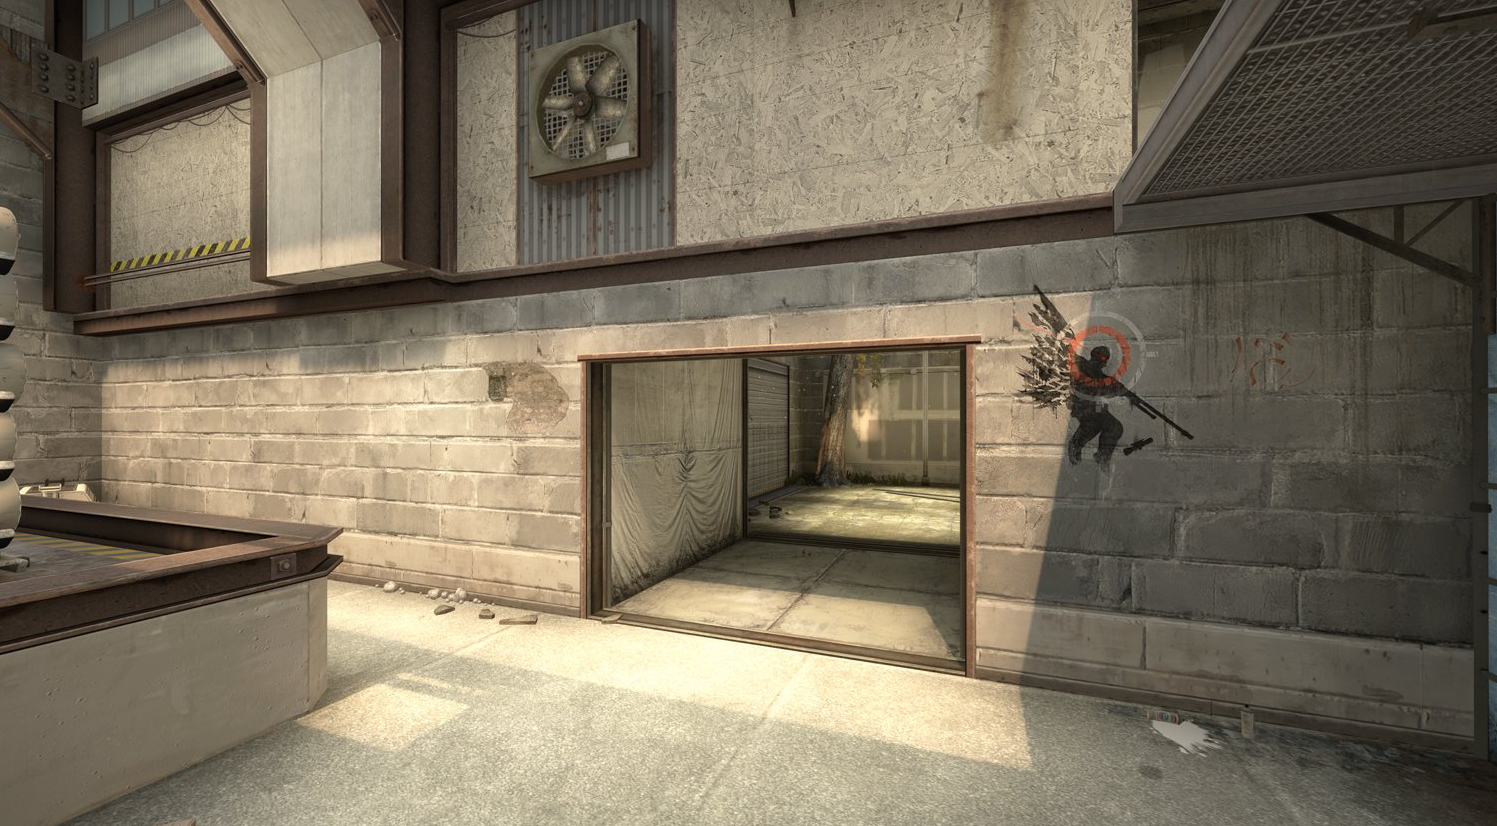 Counter-Strike Pro Gets Best Play Tattooed On His Own Body